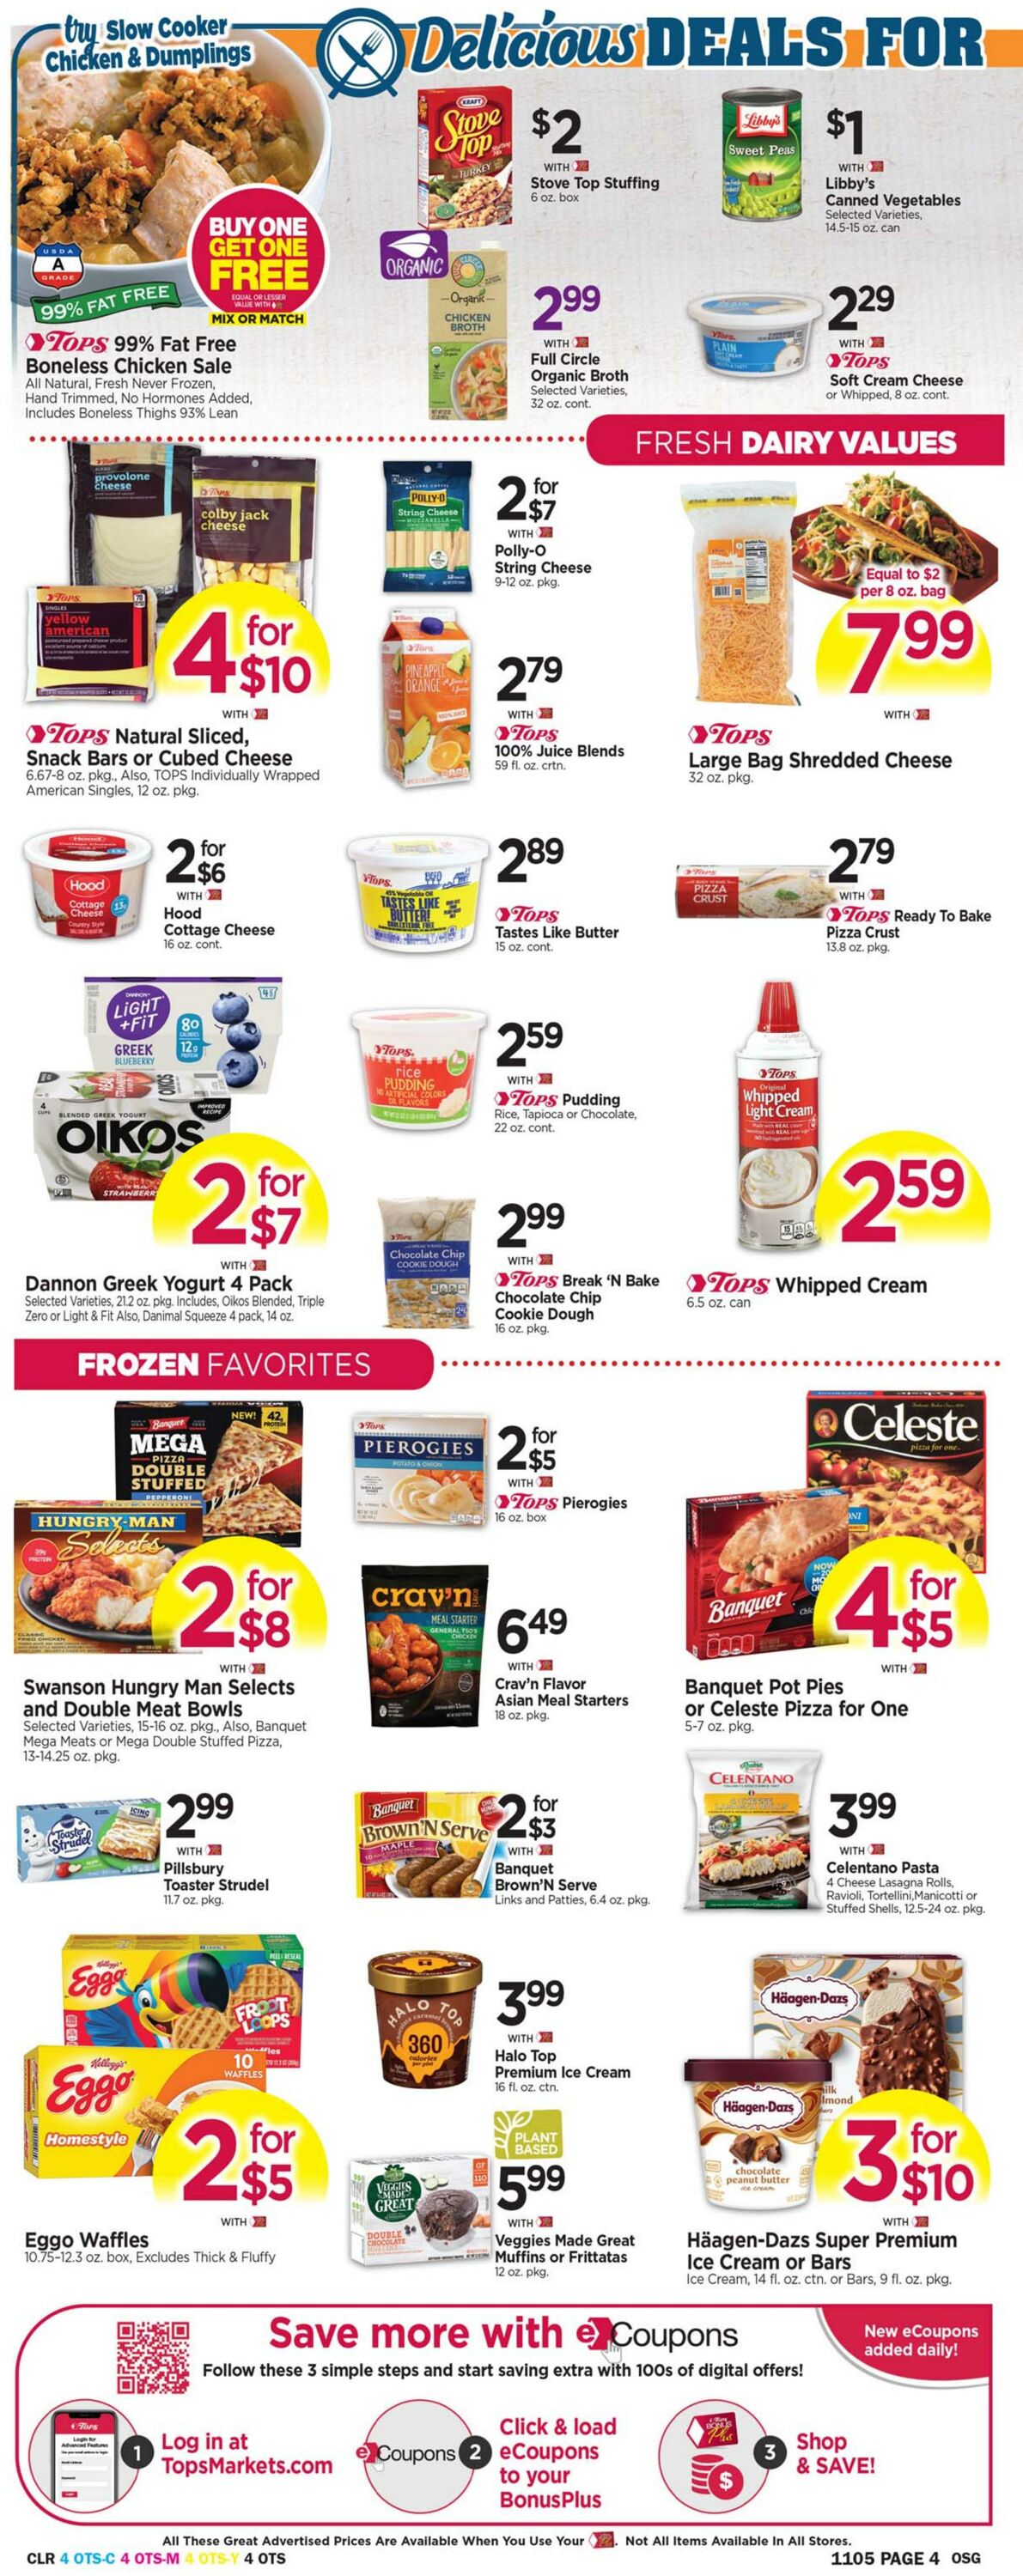 Weekly ad Tops Friendly Markets 10/30/2022-11/05/2022